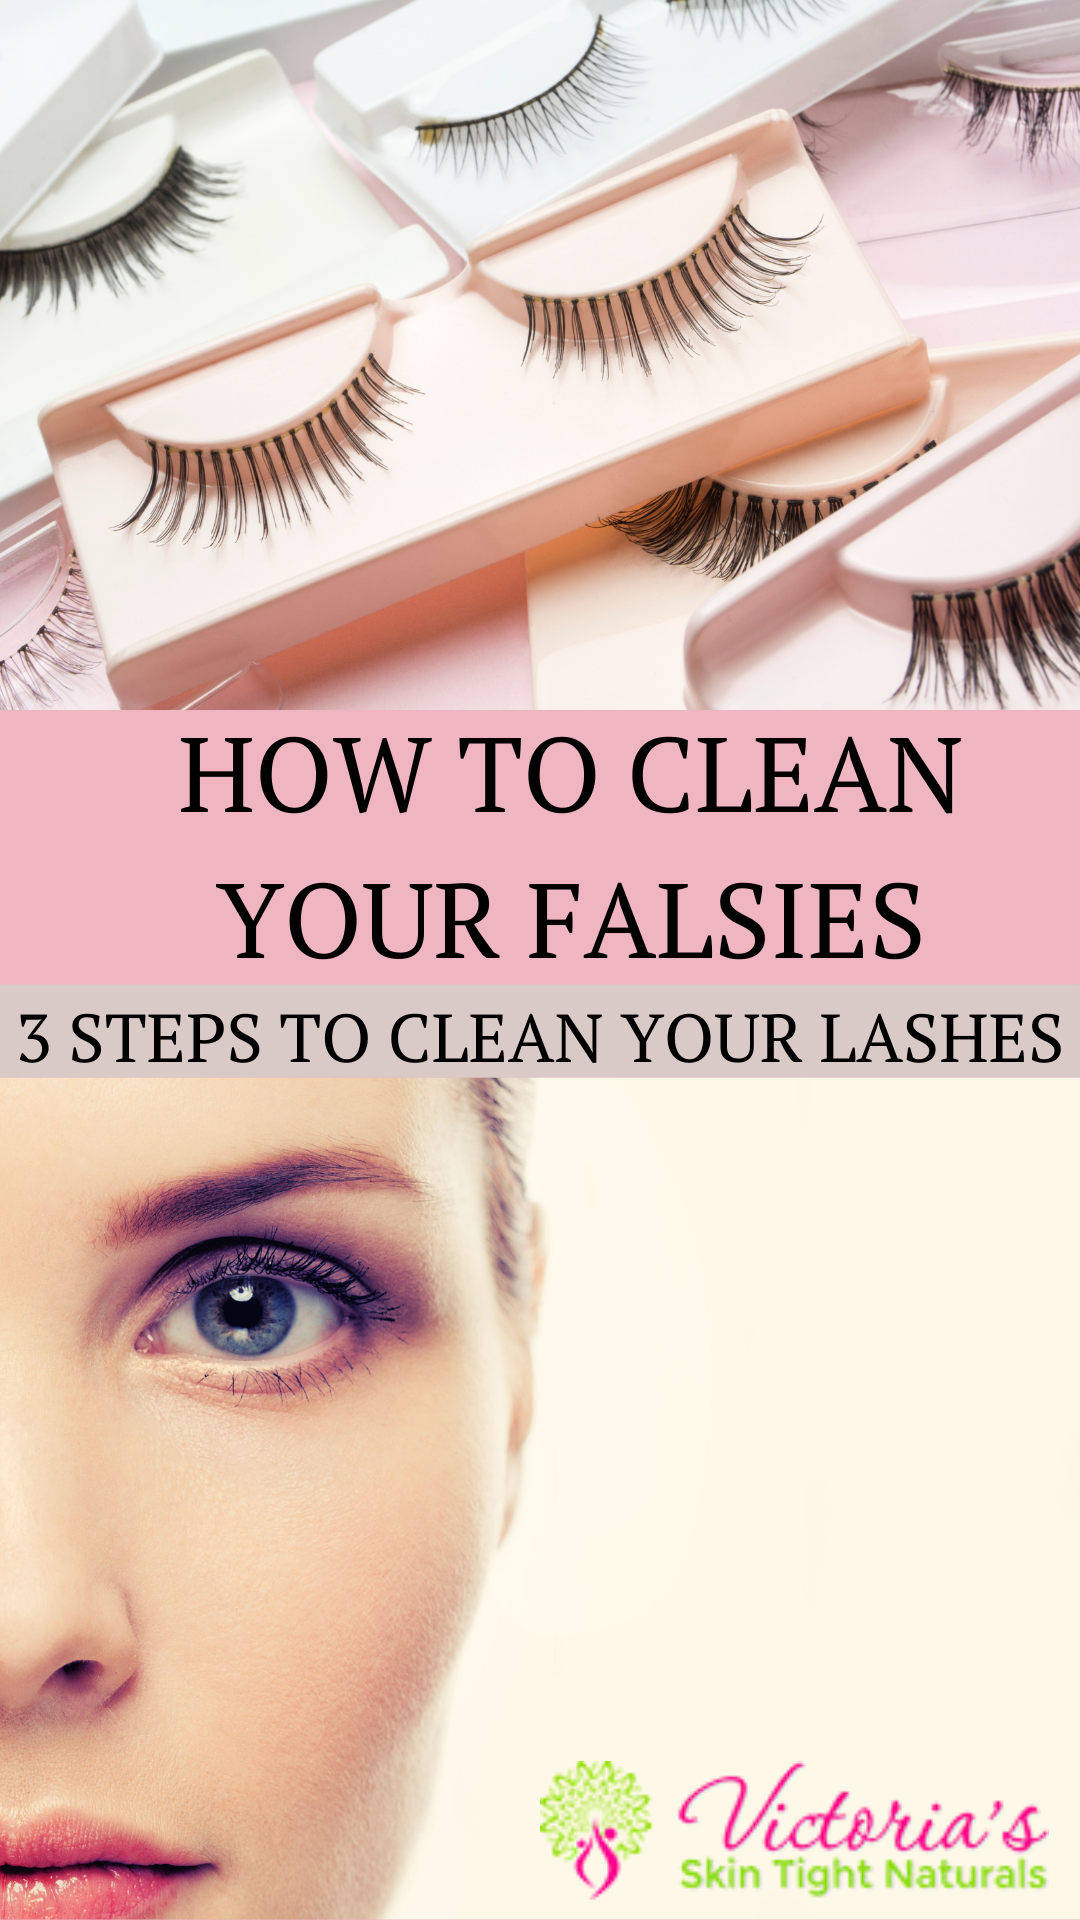 How To Clean Your Eyelashes